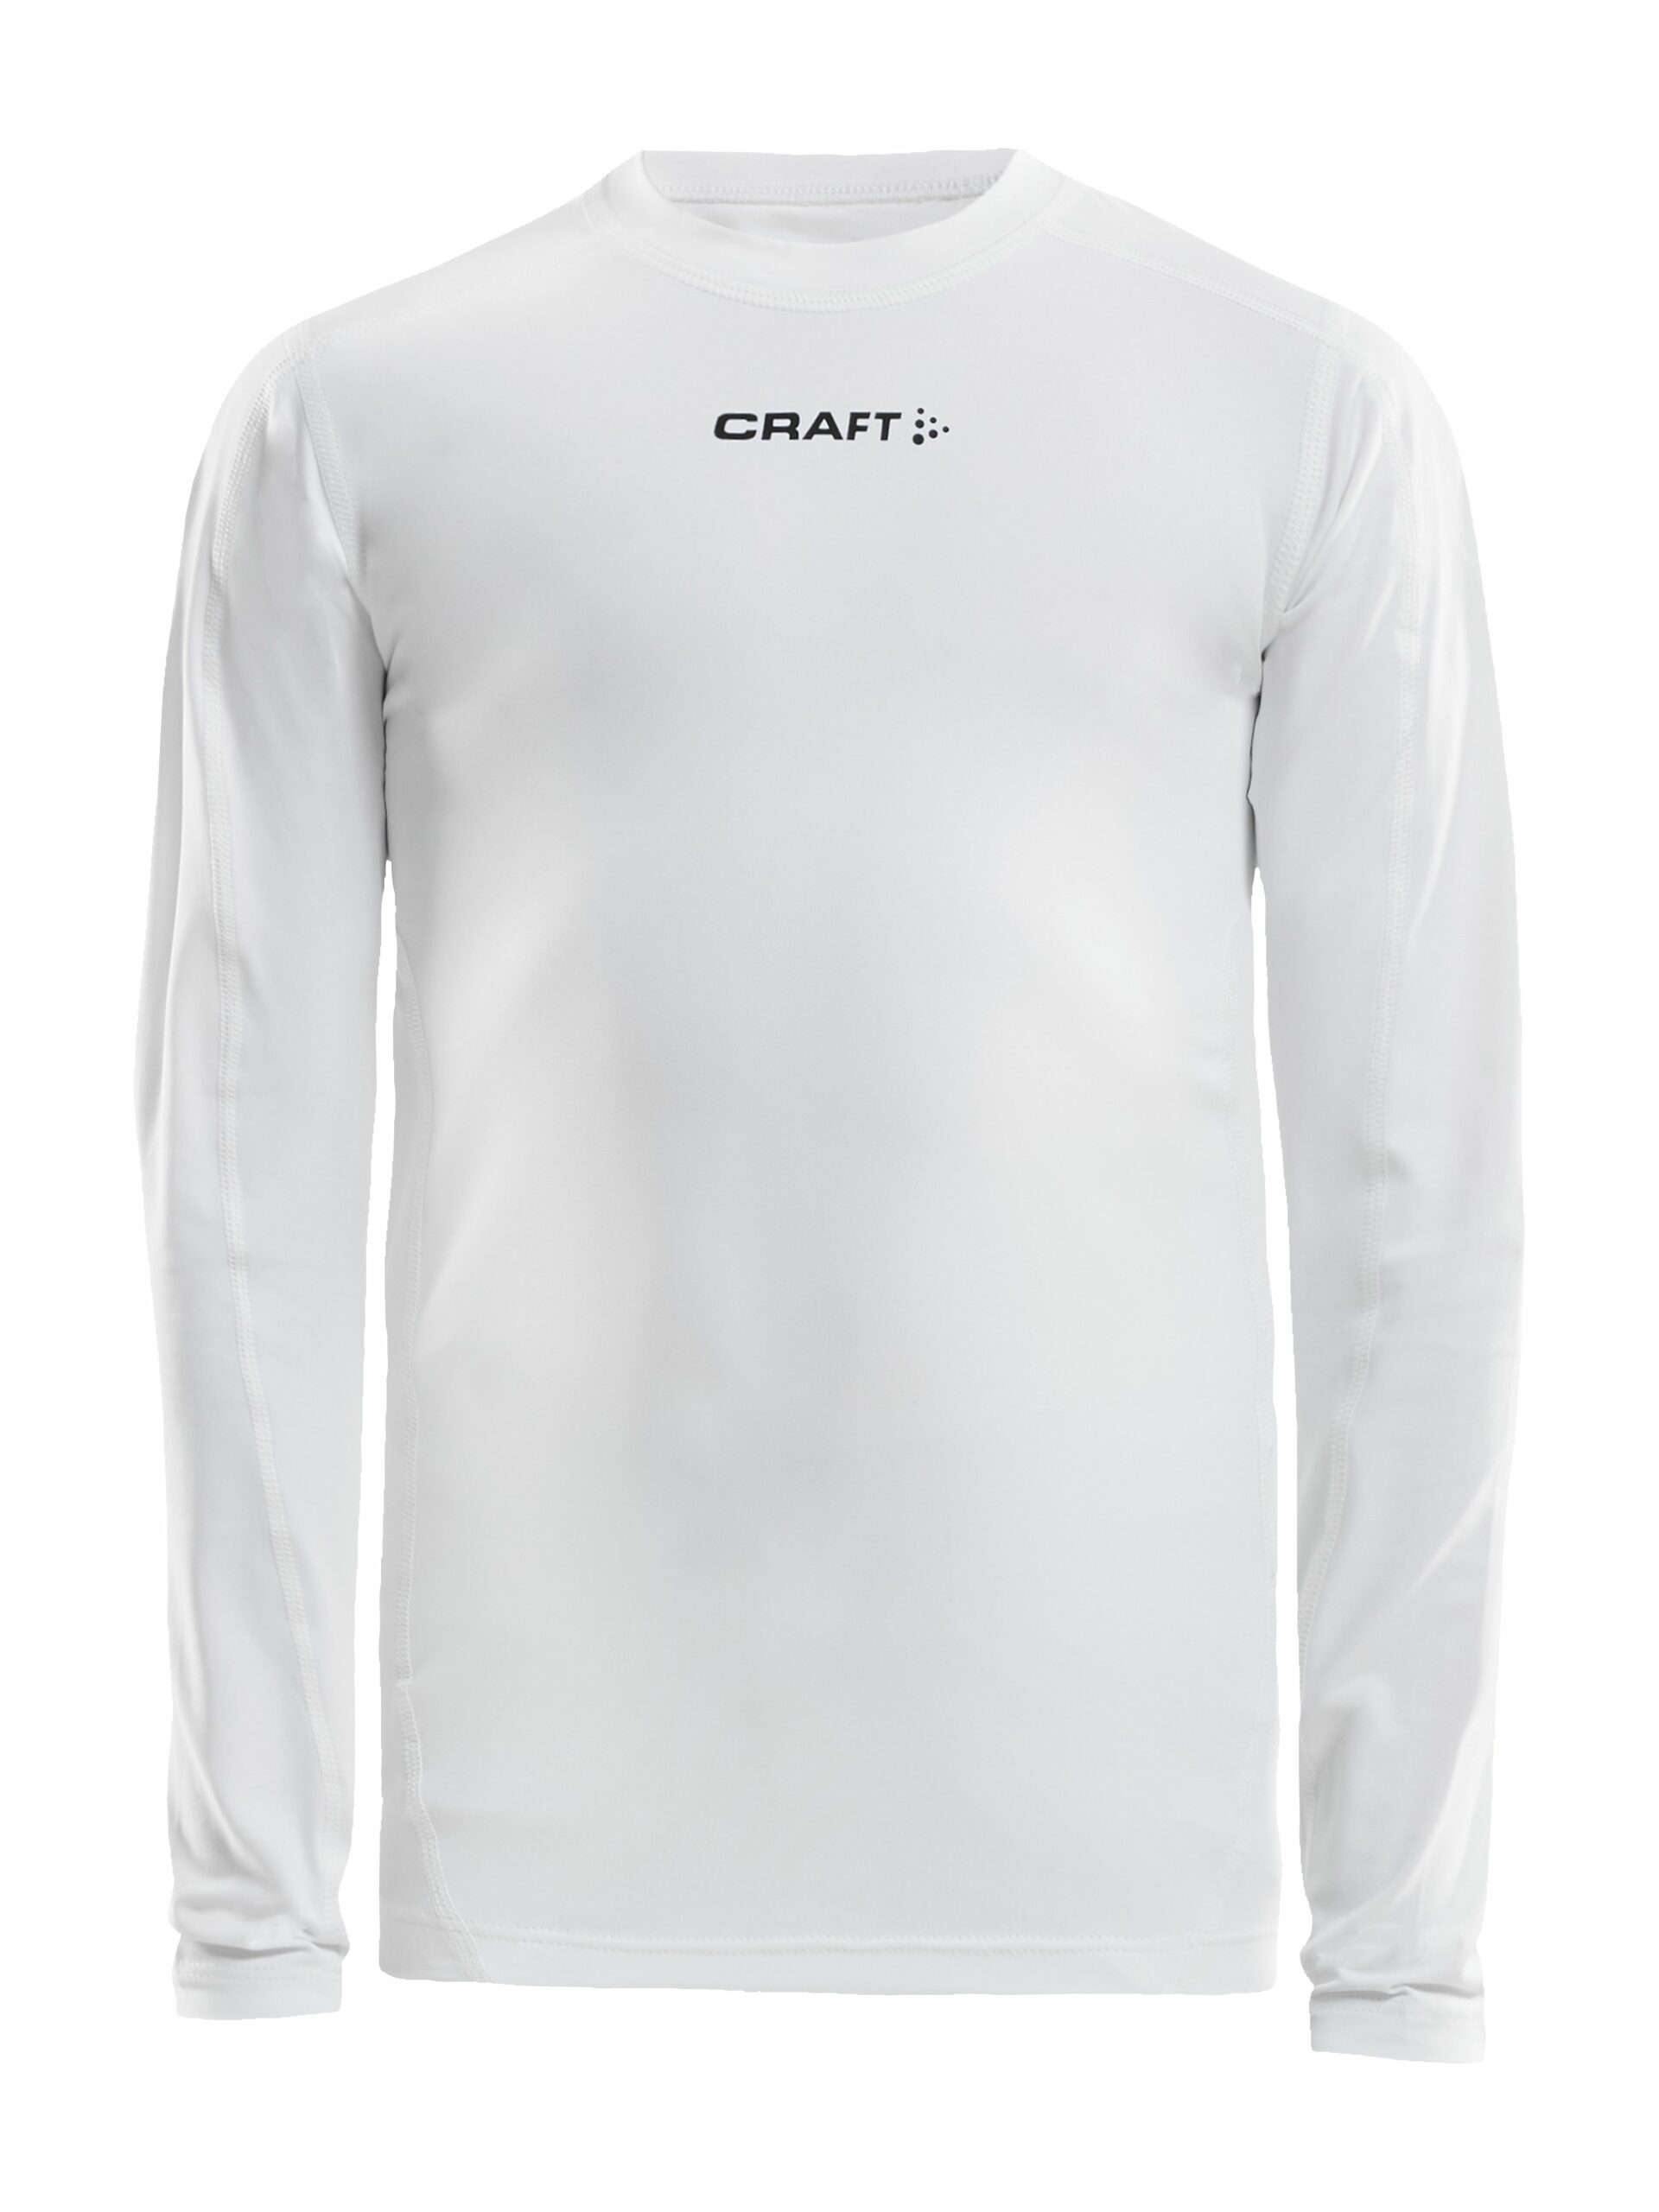 Craft - Pro Control Compression Long Sleeve JR - White 122/128